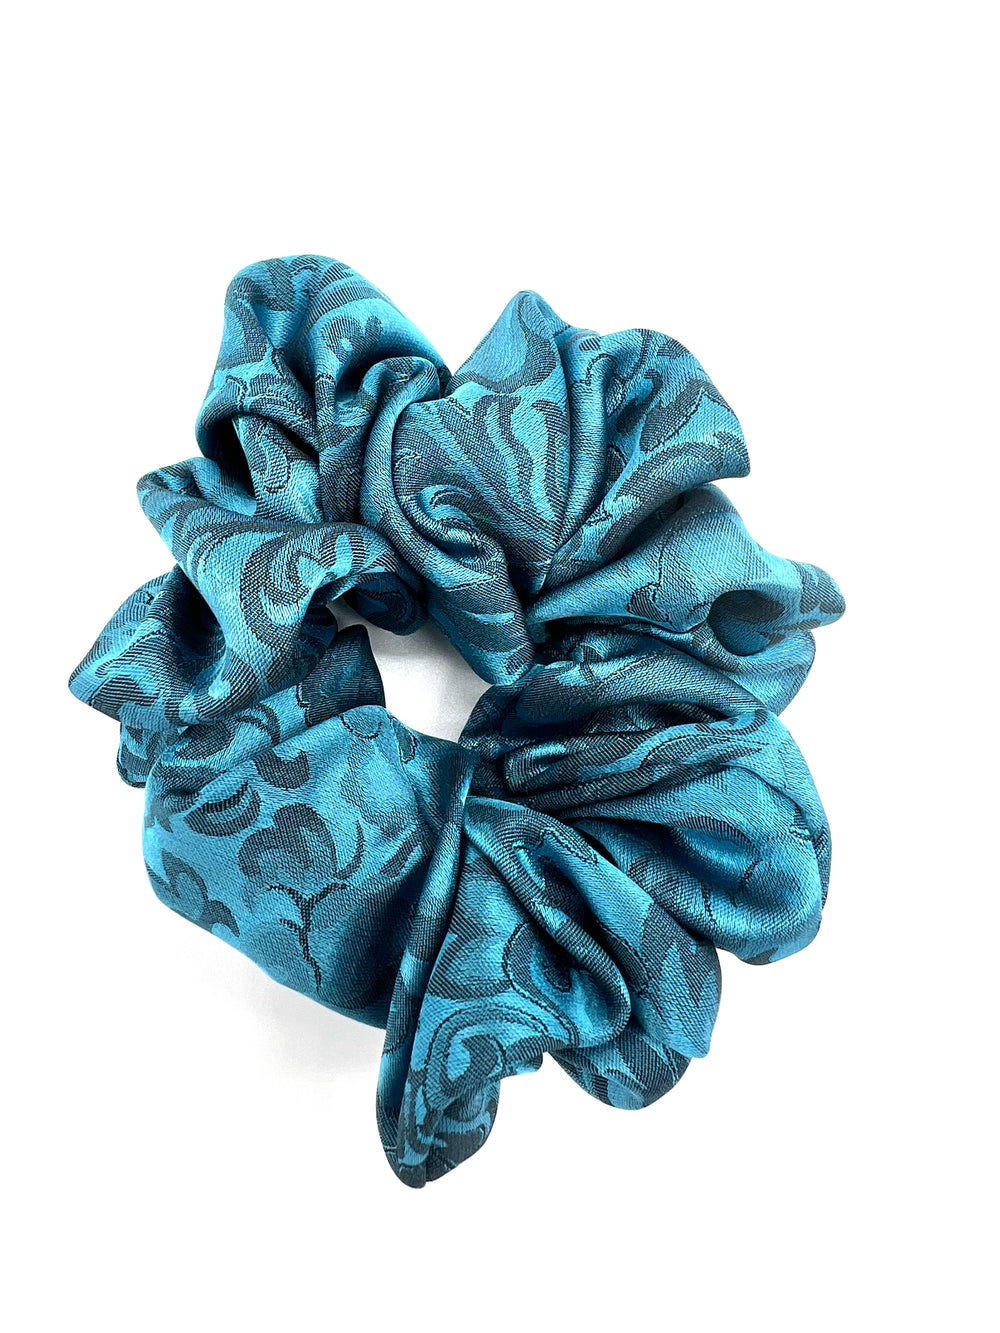 The Turquoise Silk Jacquard Scrunchie